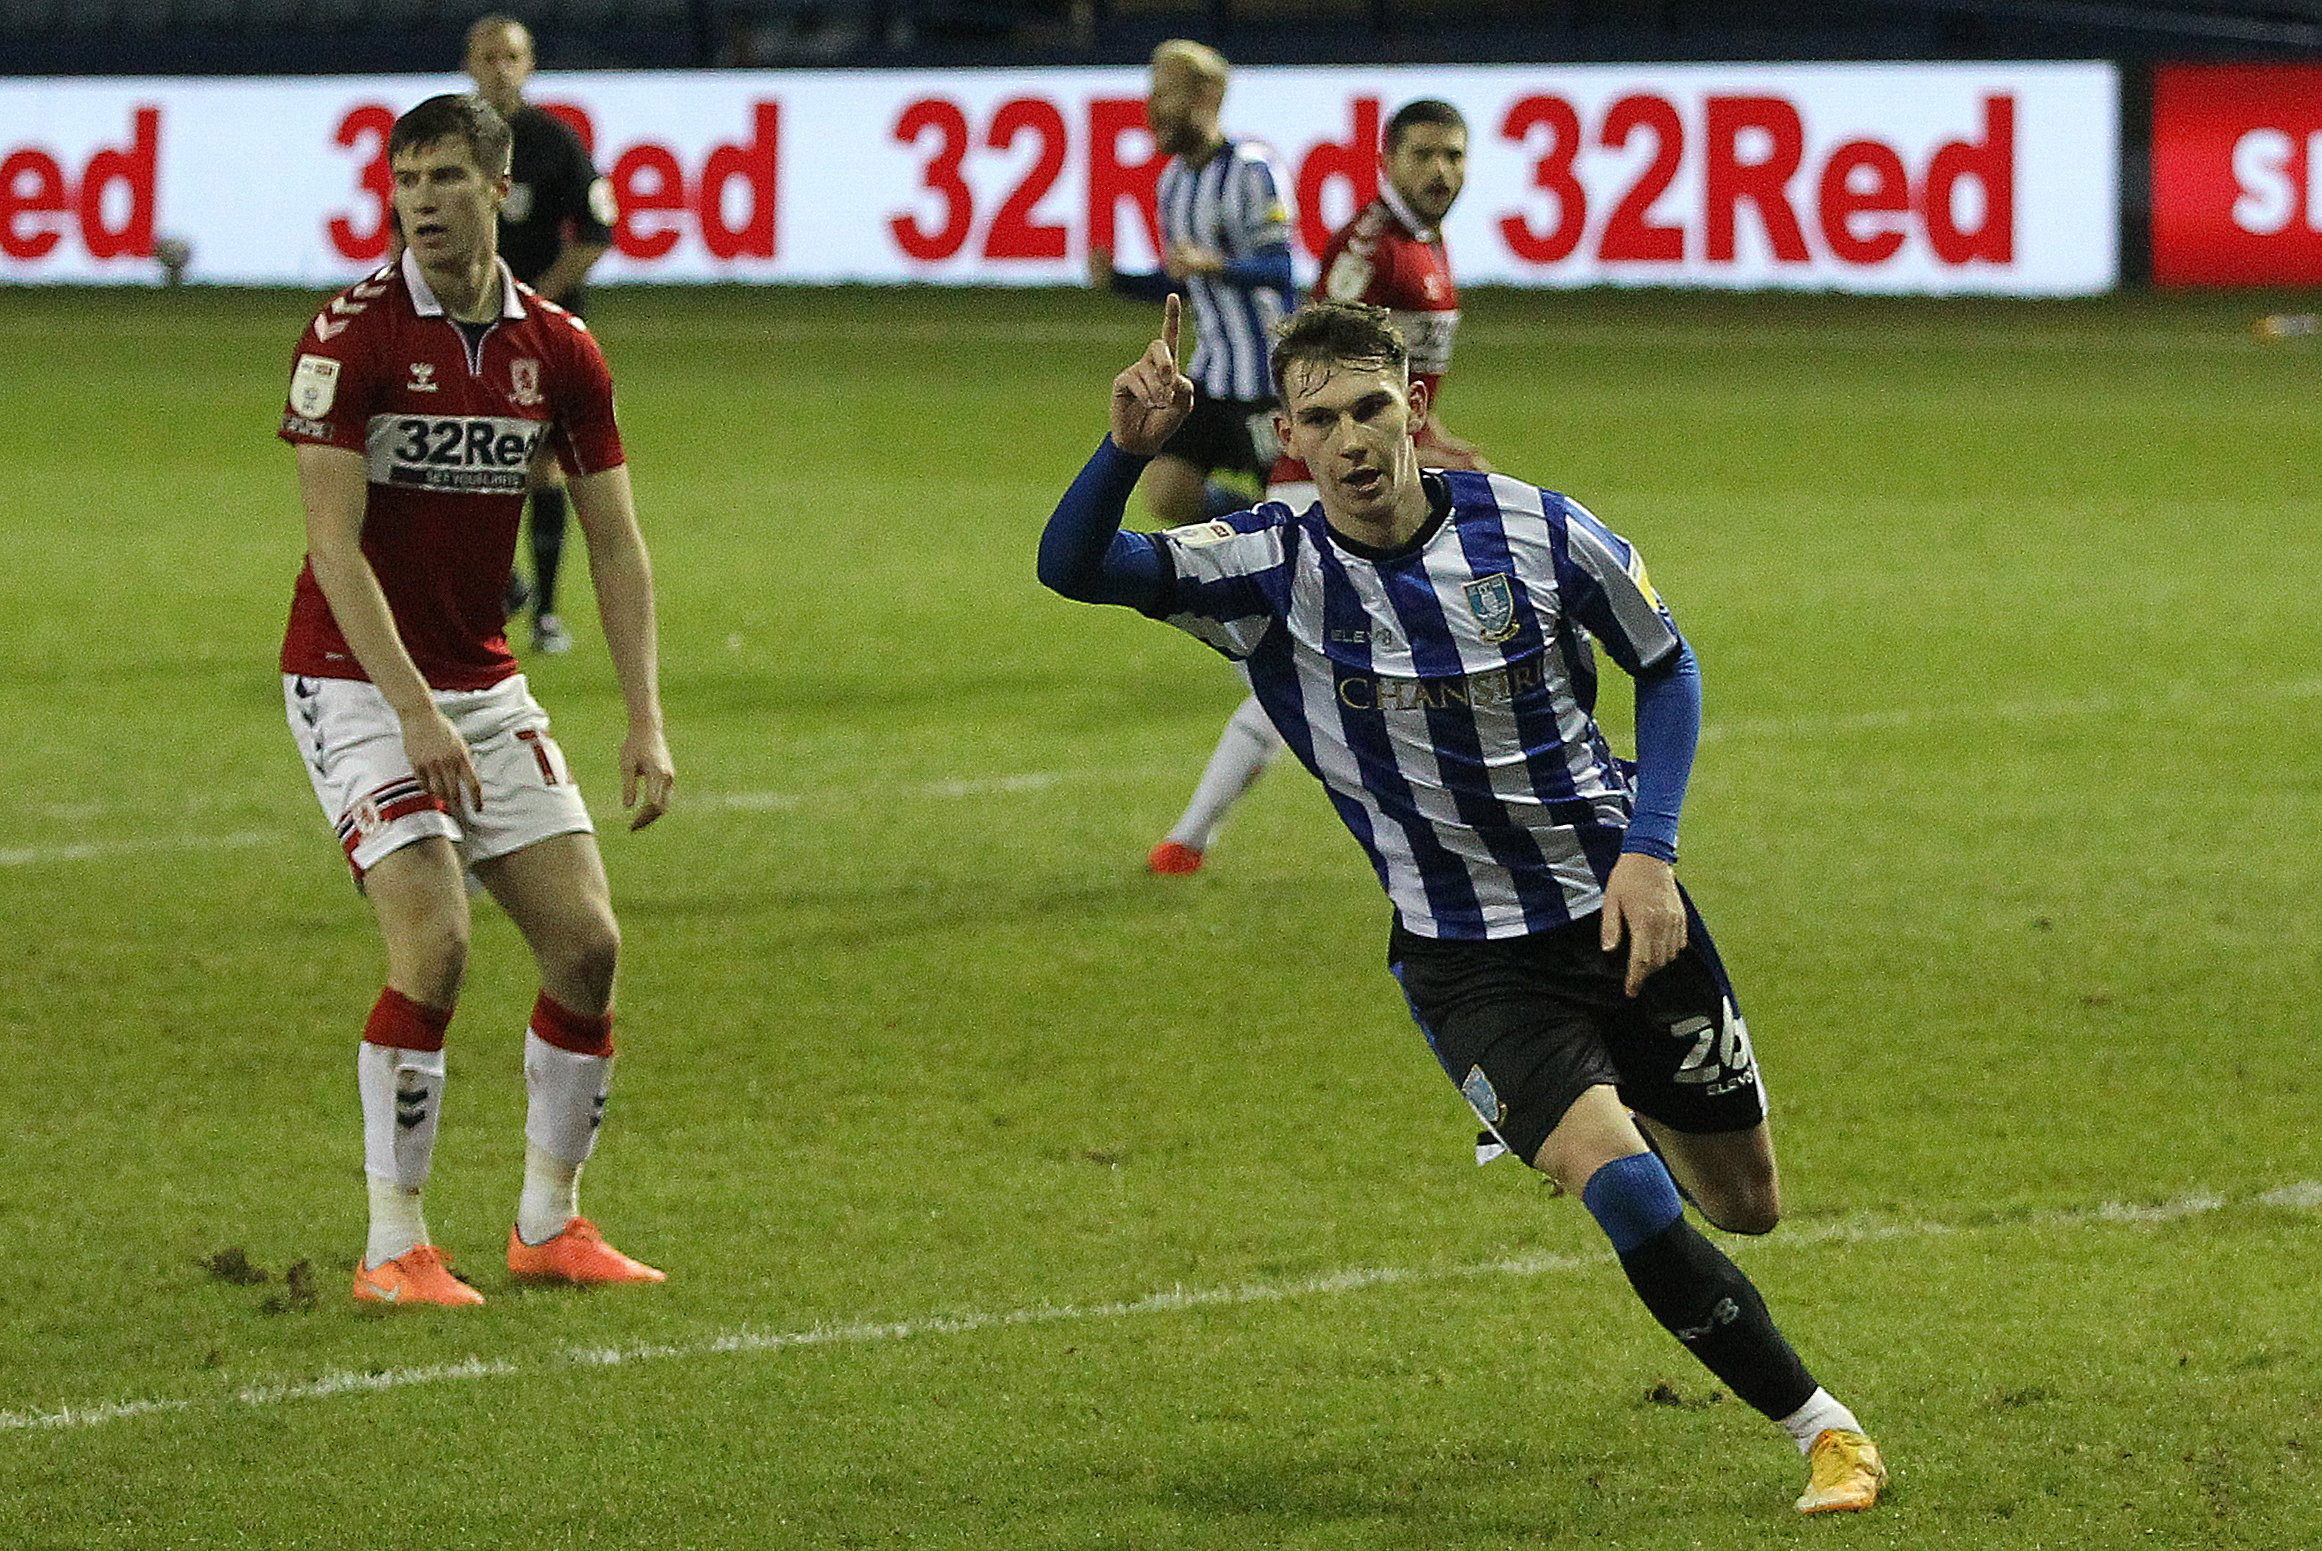 Sheffield Wednesday youngster Liam Shaw